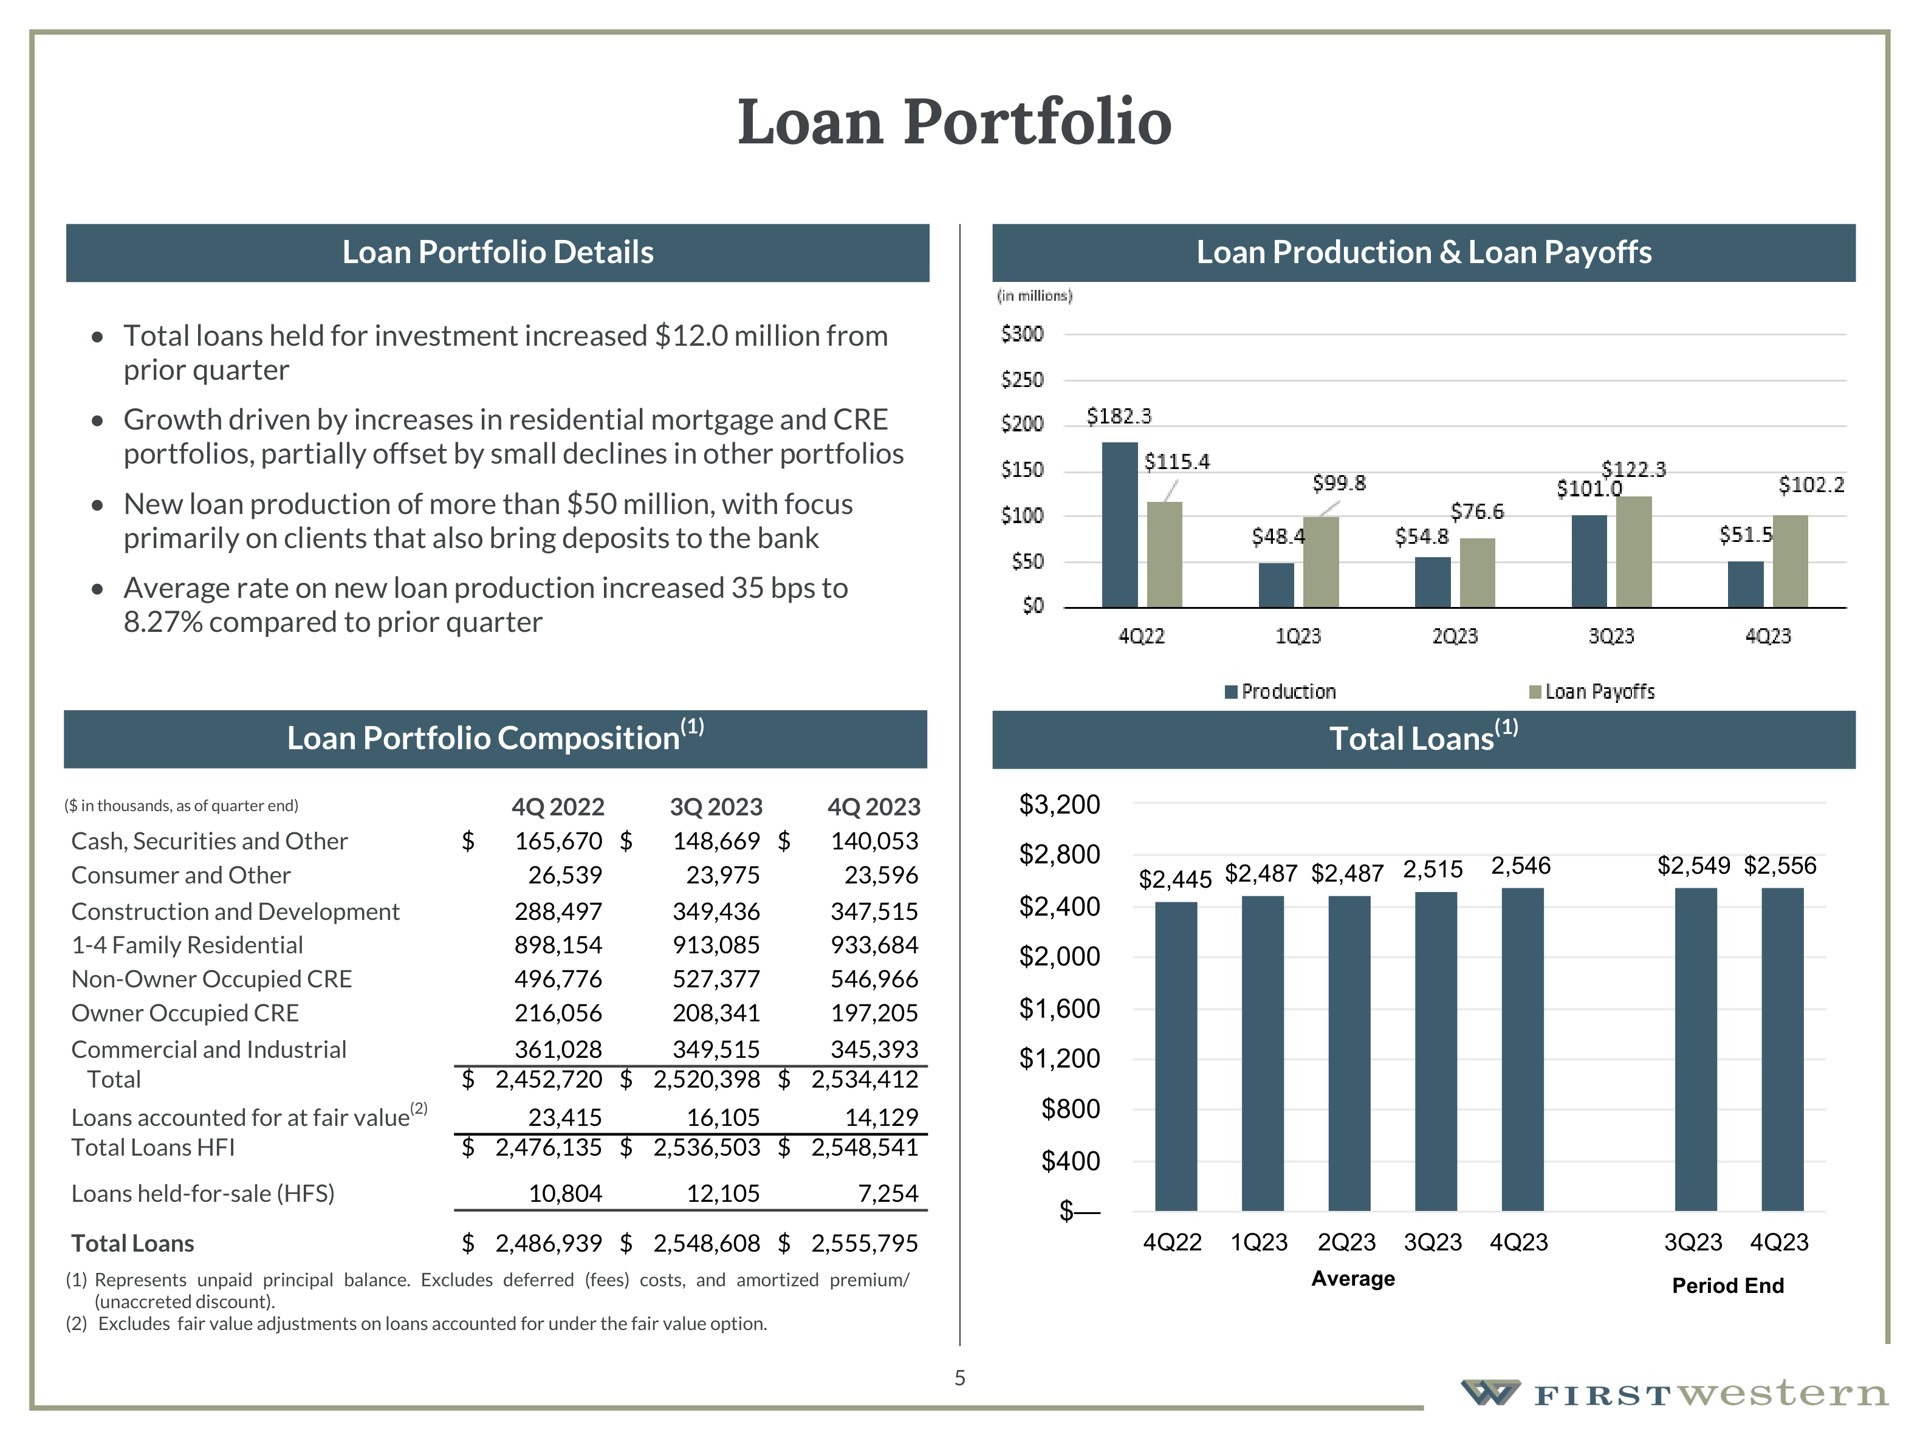 loan portfolio loan portfolio details loan production loan payoffs total loans held for investment increased million from prior quarter growth driven by increases in residential mortgage and portfolios partially offset by small declines in other portfolios new loan production of more than million with focus primarily on clients that also bring deposits to the bank average rate on new loan production increased to compared to prior quarter loan portfolio composition total loans | First Western Financial